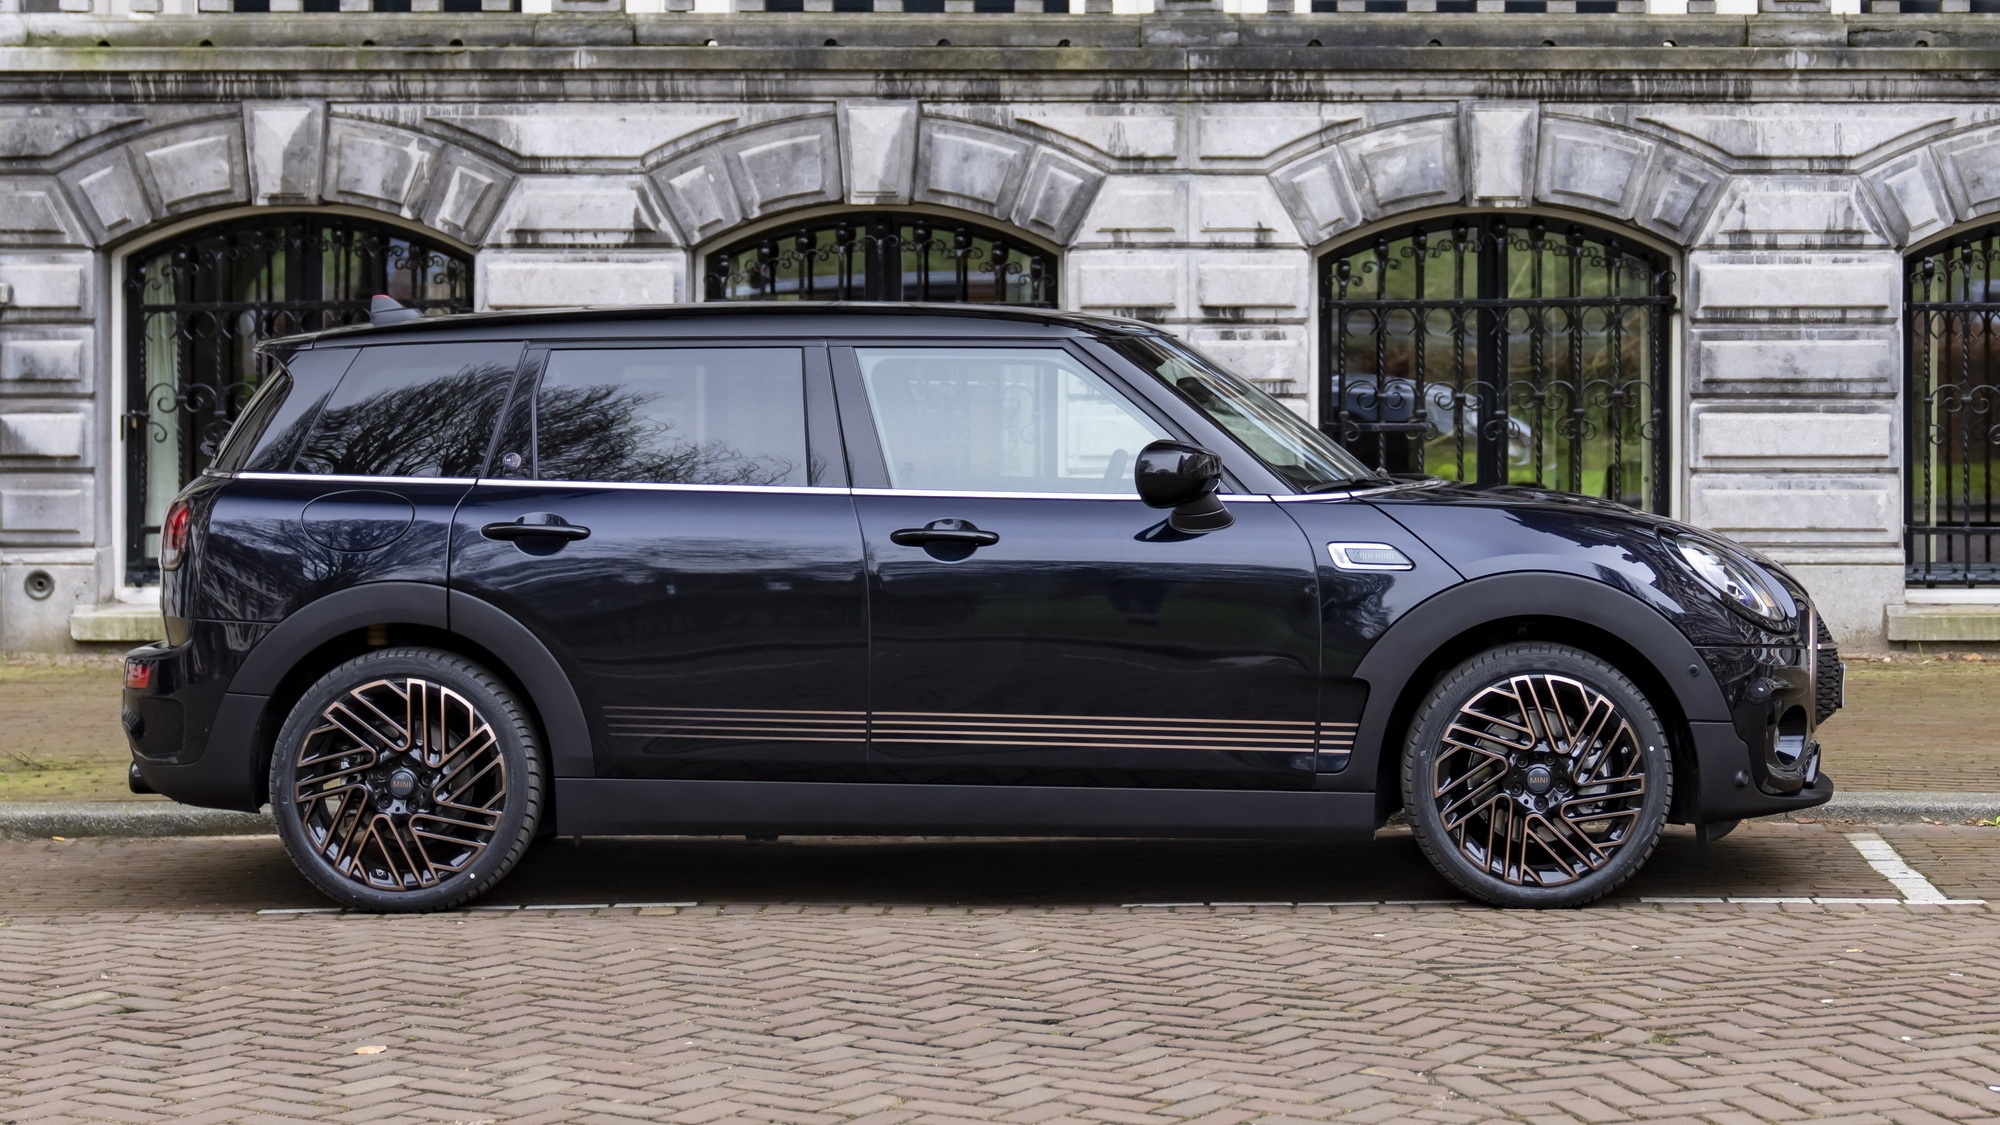 Final Edition Package Adds $10,000 To Mini Clubman Price